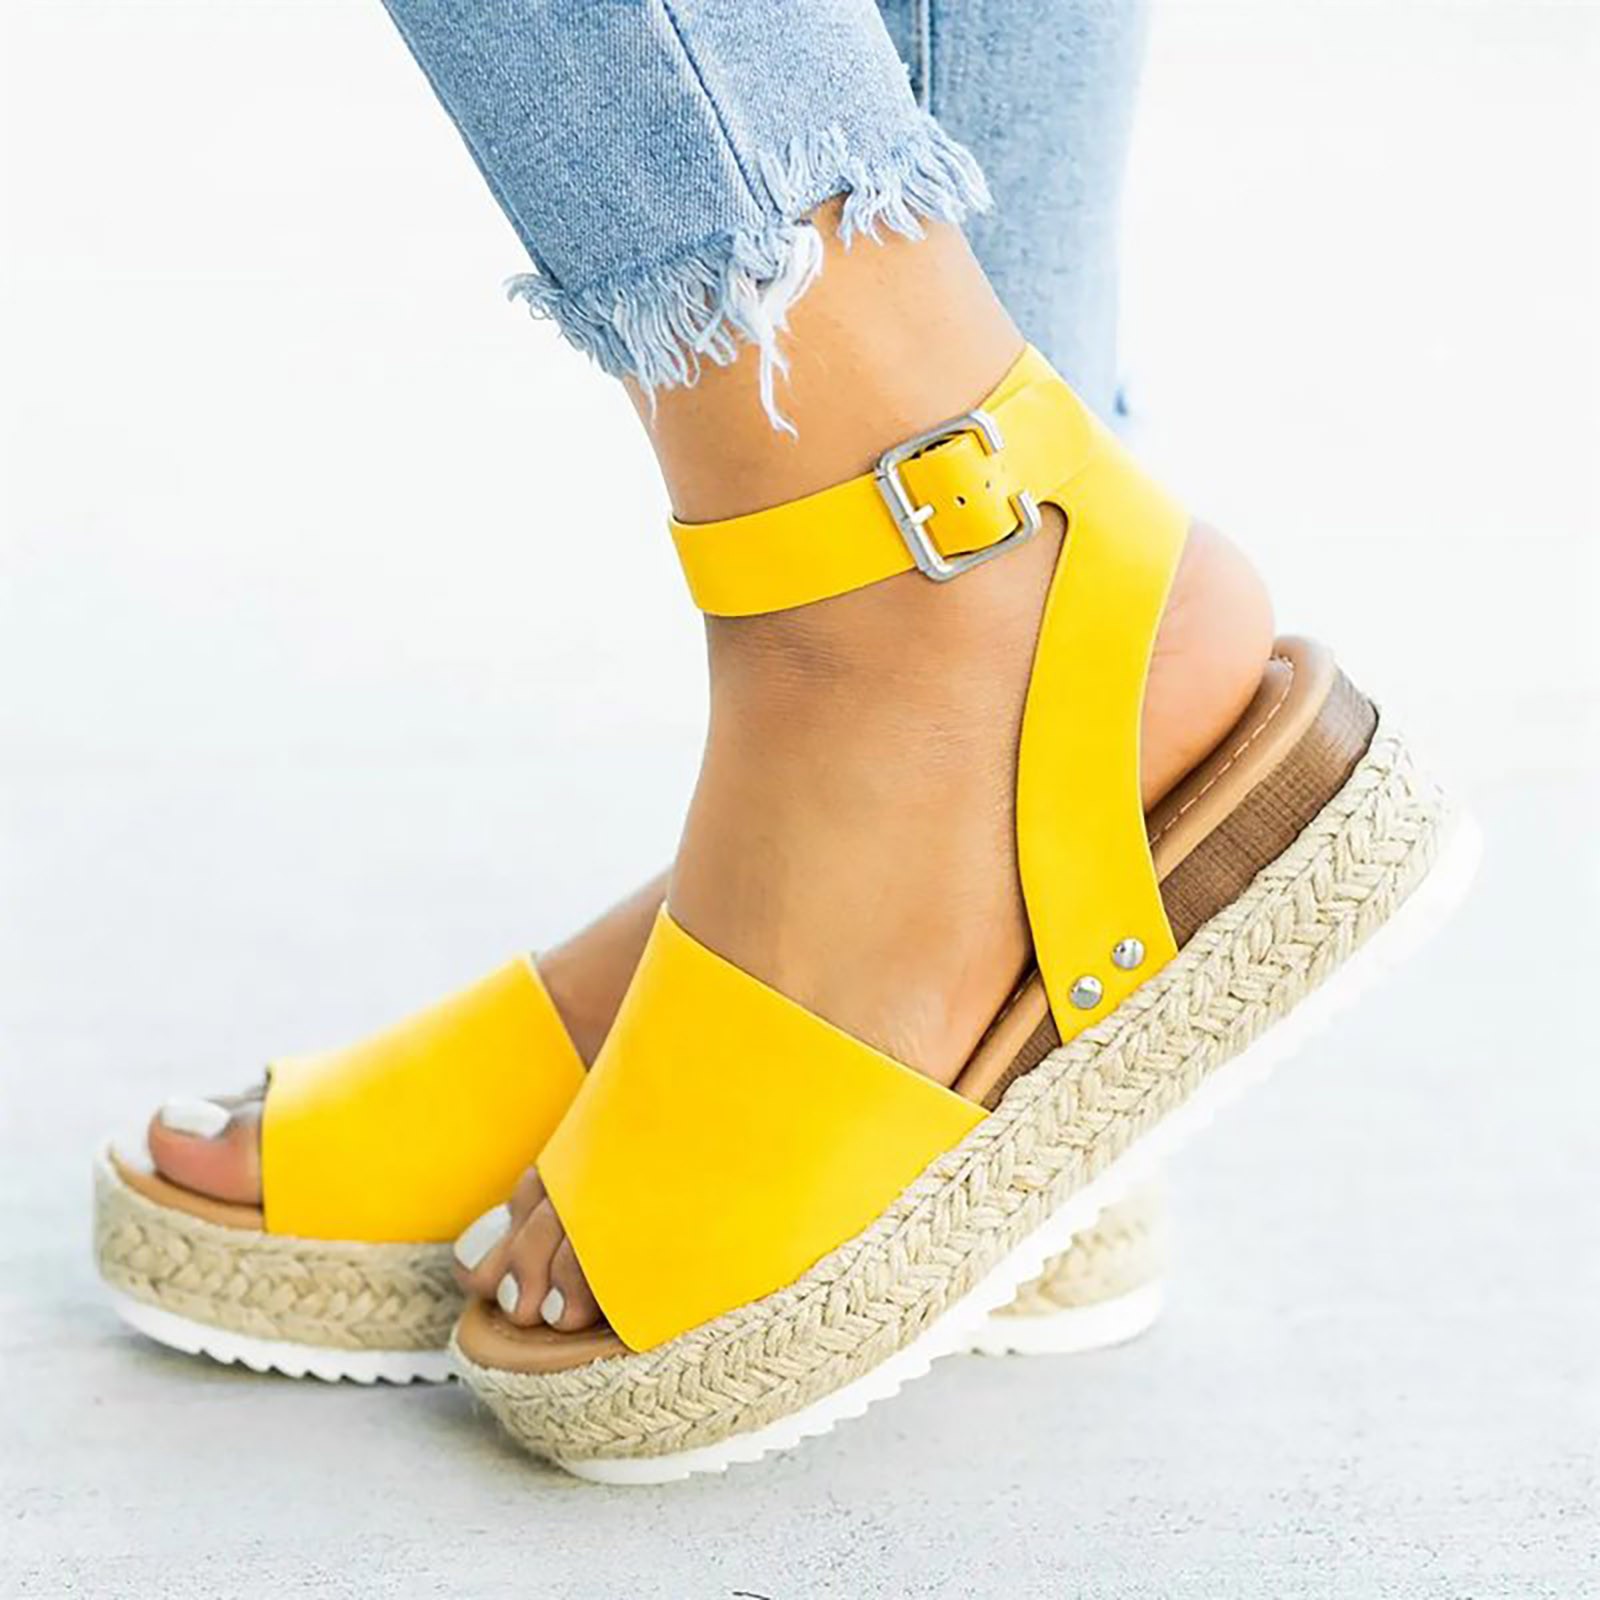 Azrian Woman Summer Sandals Open toe Casual Platform Wedge Shoes Casual Canvas Shoes - image 1 of 5